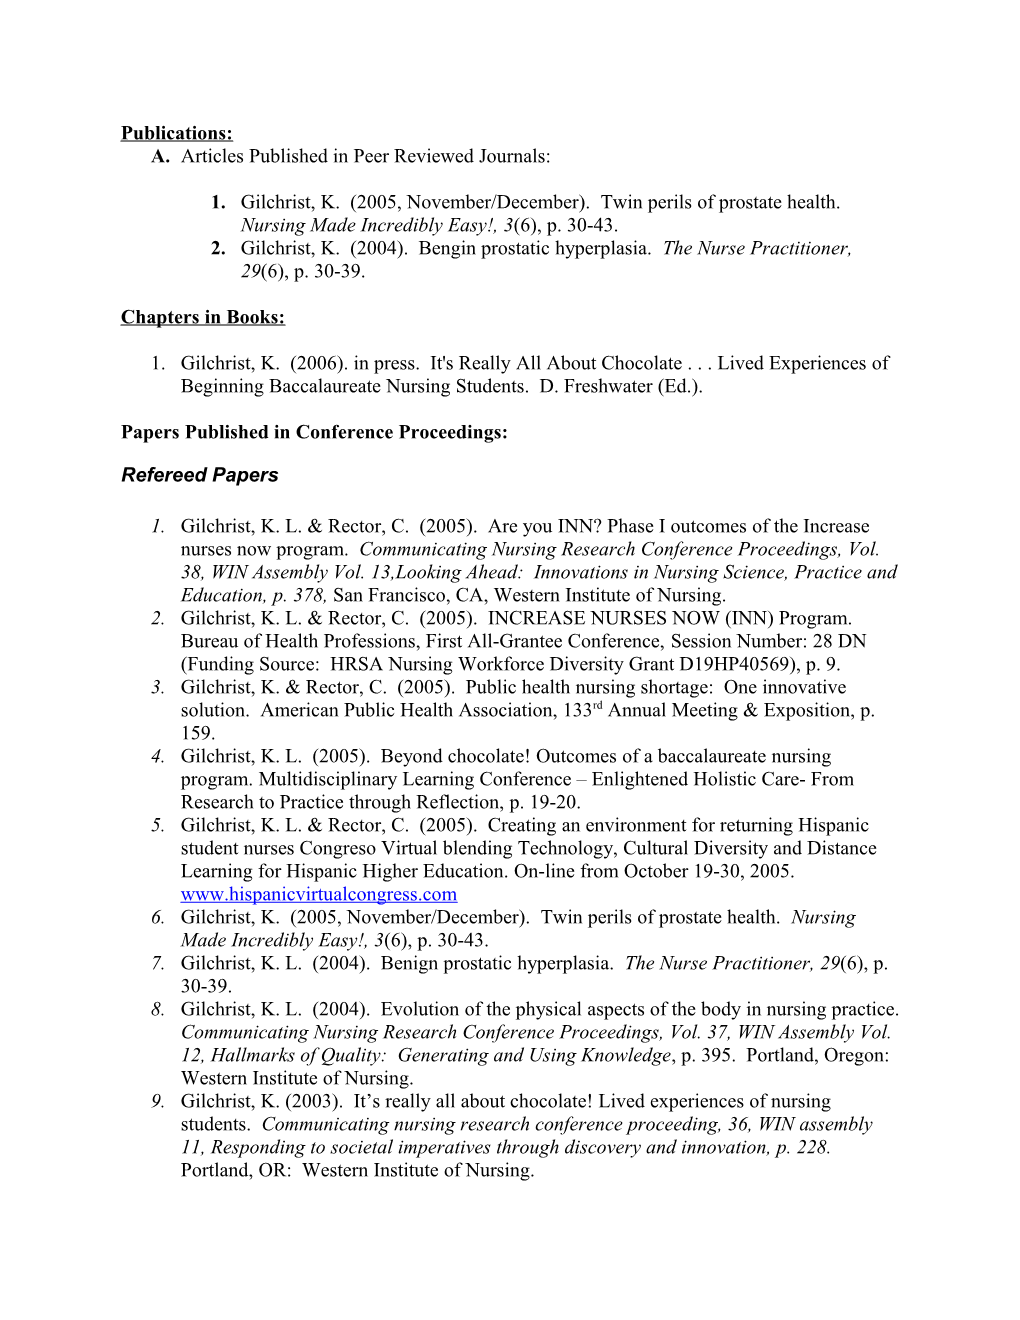 Papers Published in Conference Proceedings